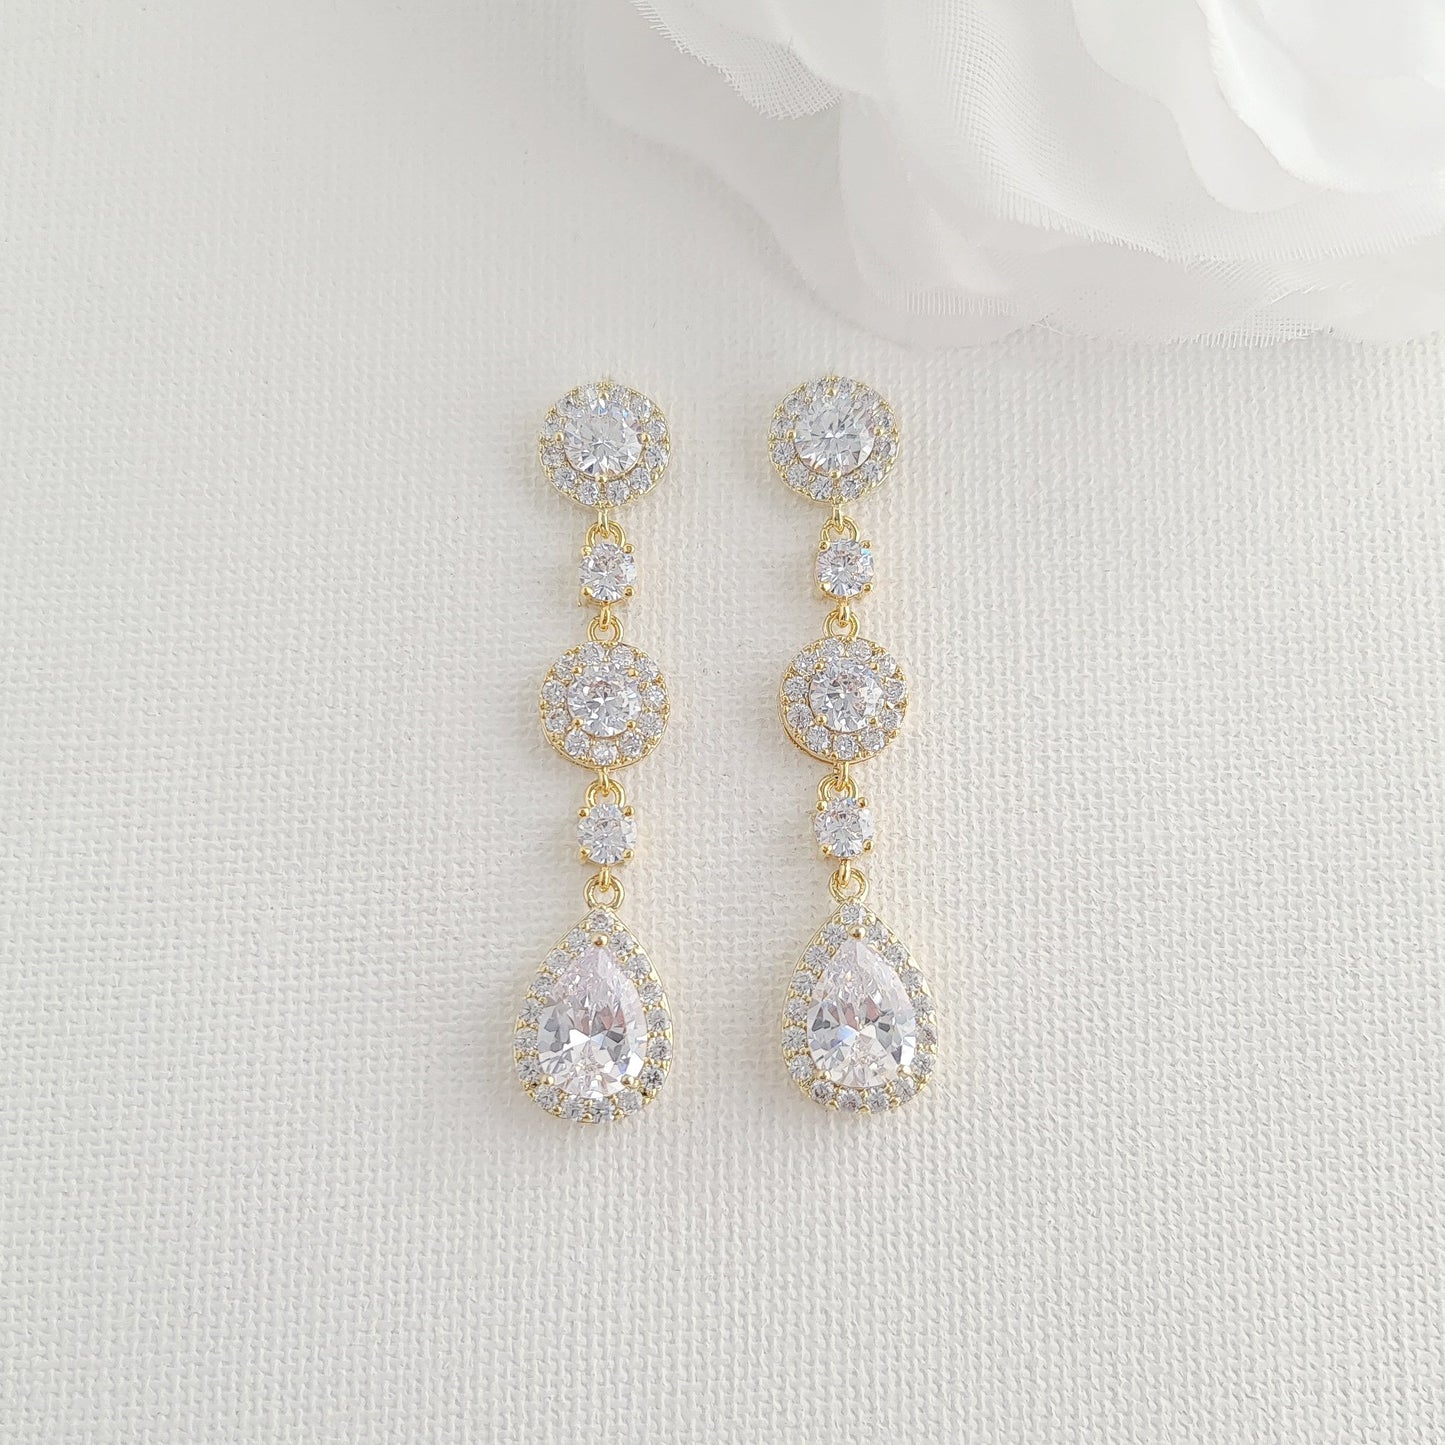 Round Crystal Earrings and Bracelet Set in Gold for Brides-Reagan